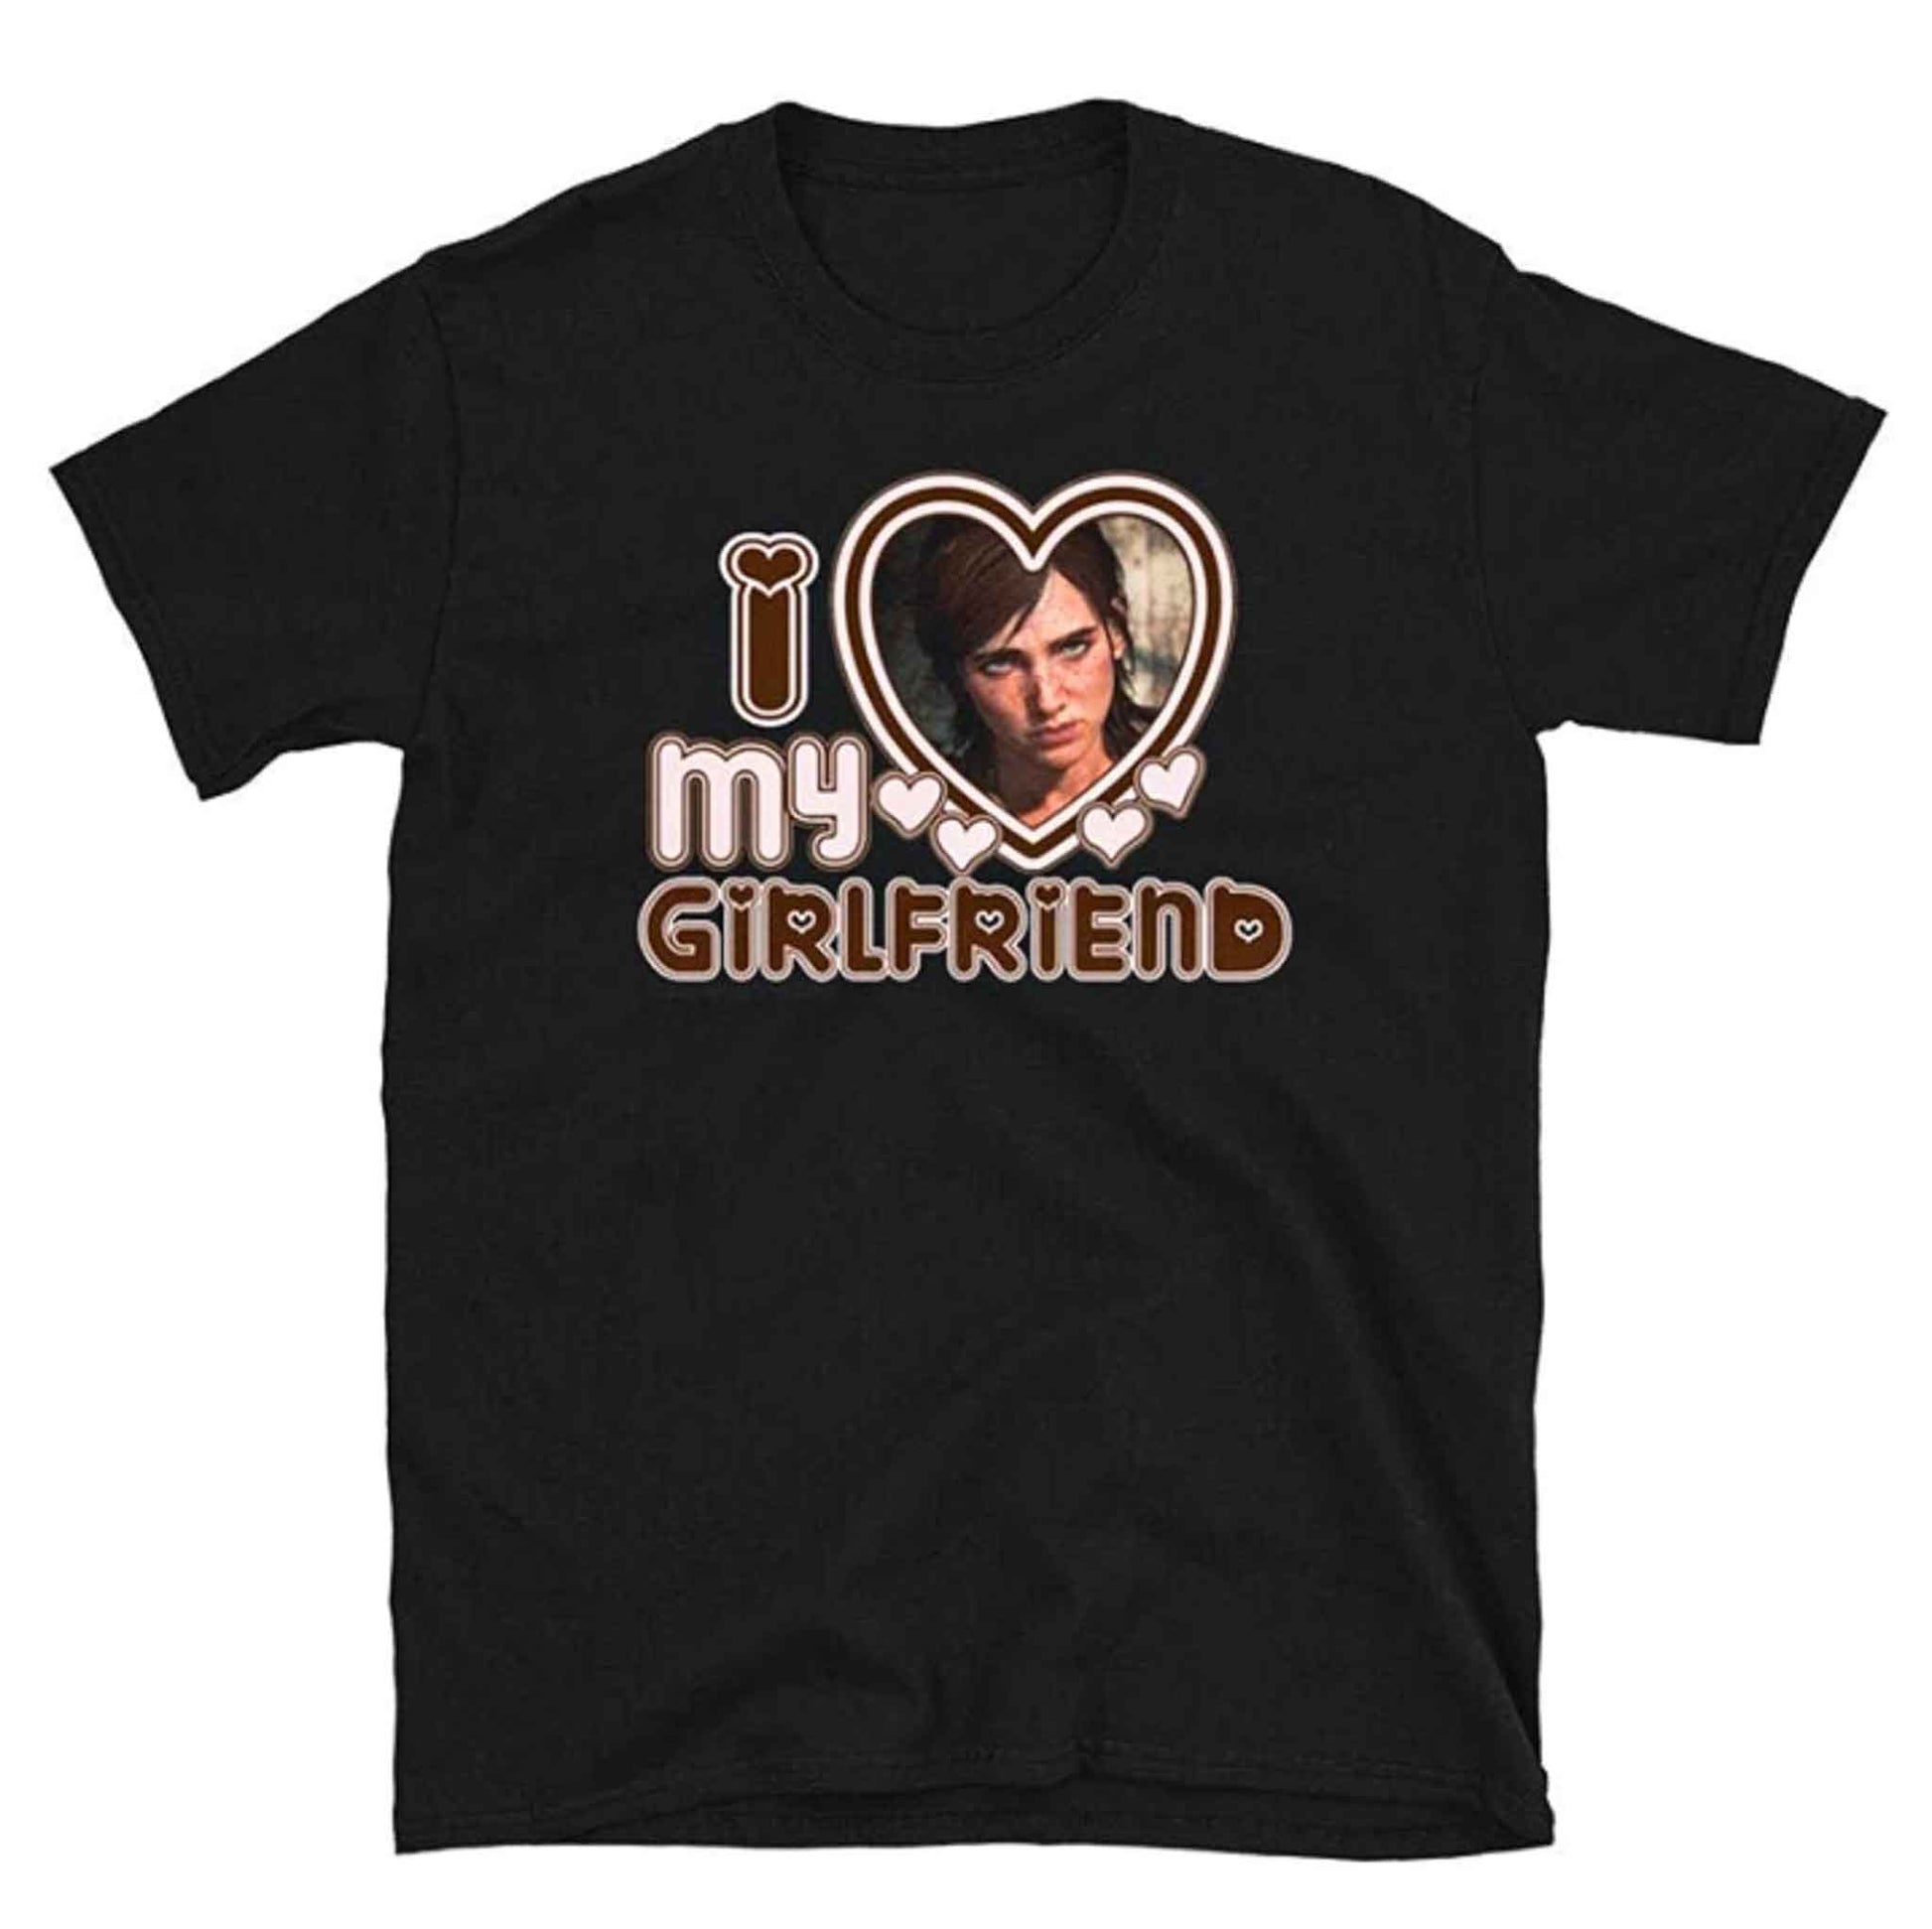 I Love My Girlfriend Ellie Williams Tshirt - Black / XL Available at 2Fast2See.co